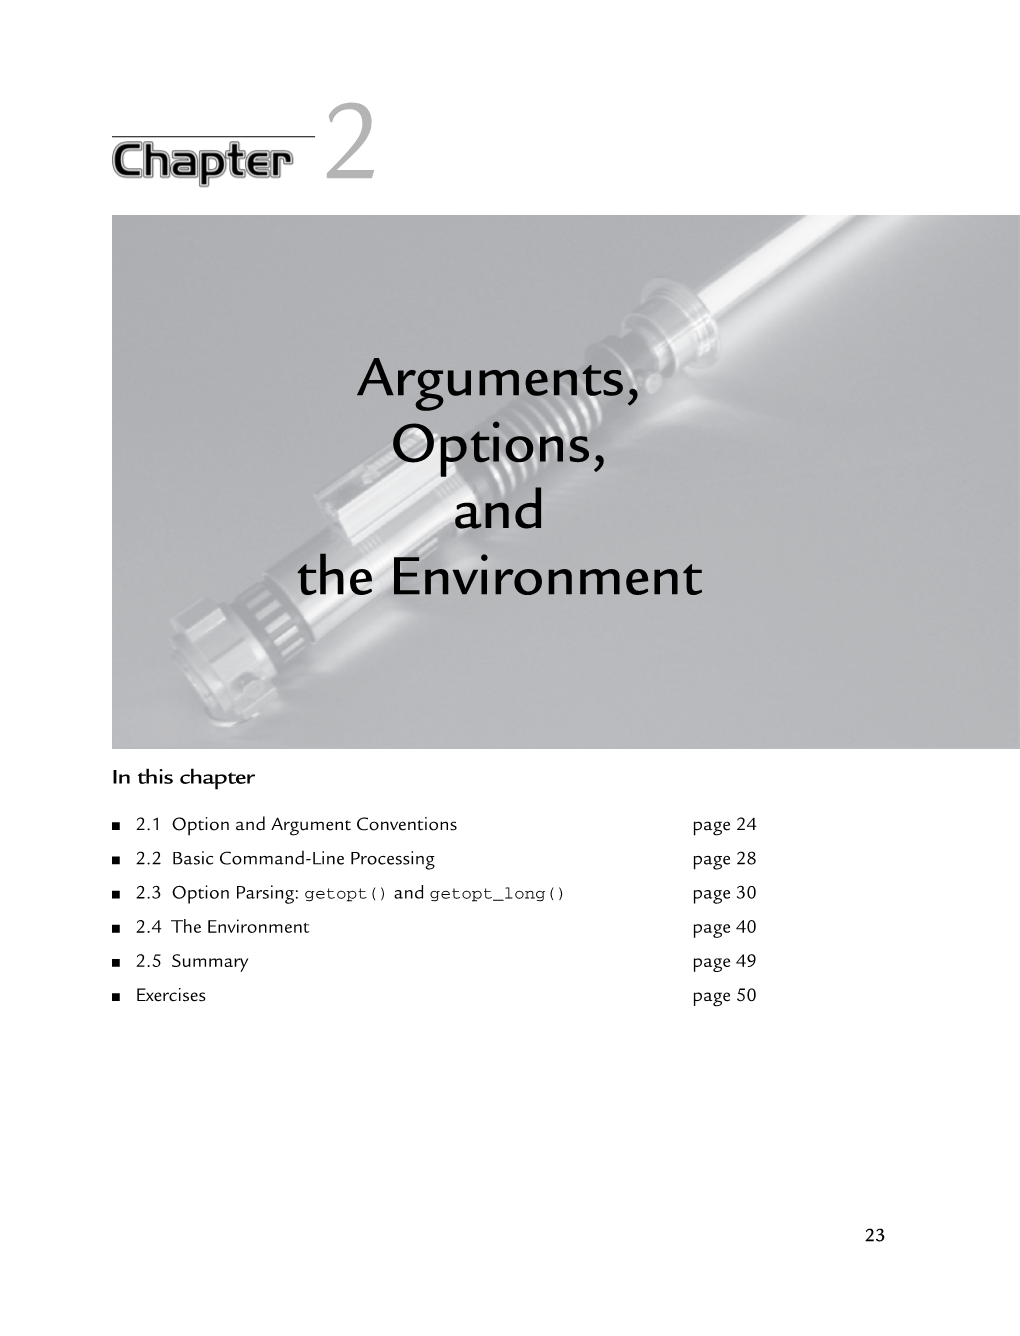 Arguments, Options, and the Environment